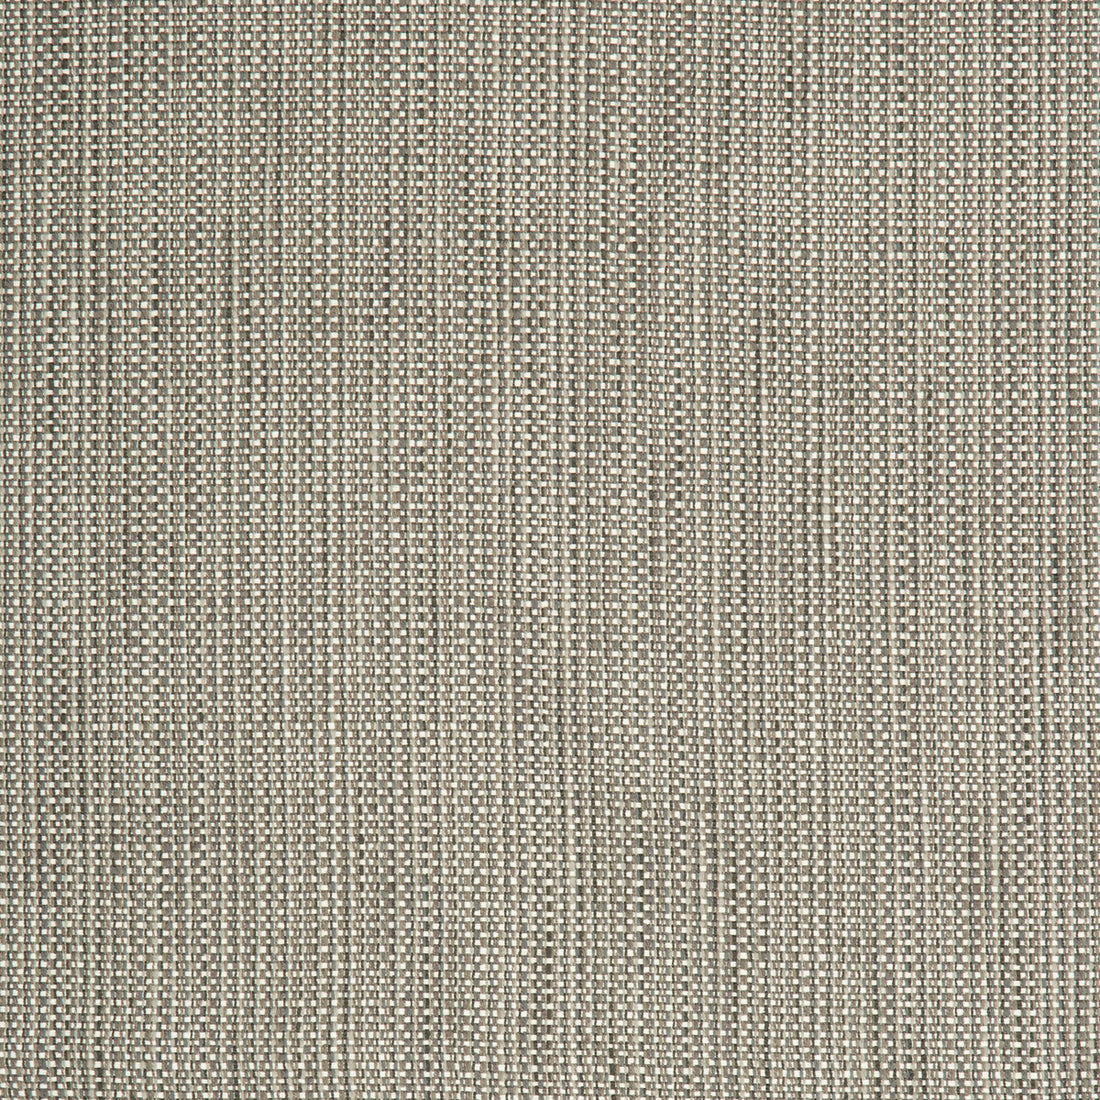 Kravet Contract fabric in 34634-21 color - pattern 34634.21.0 - by Kravet Contract in the Crypton Incase collection